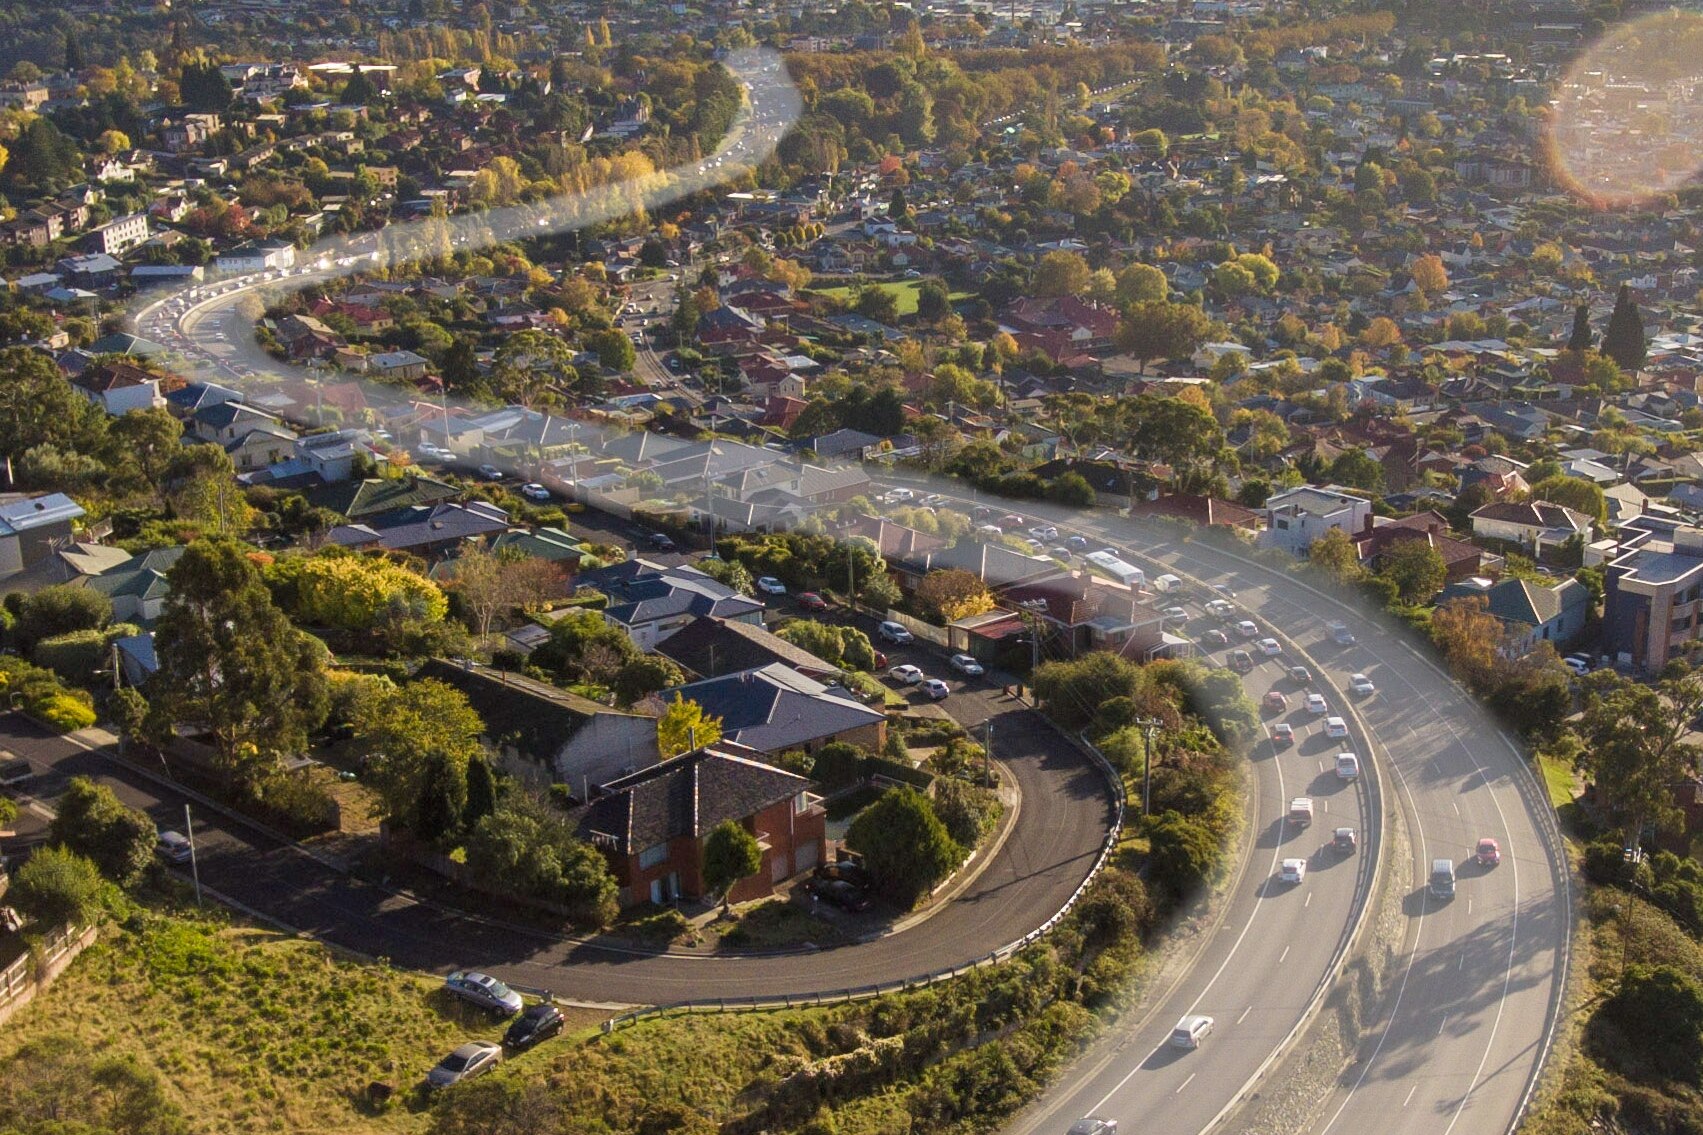 A highlighted road into Hobart, seen from the air.